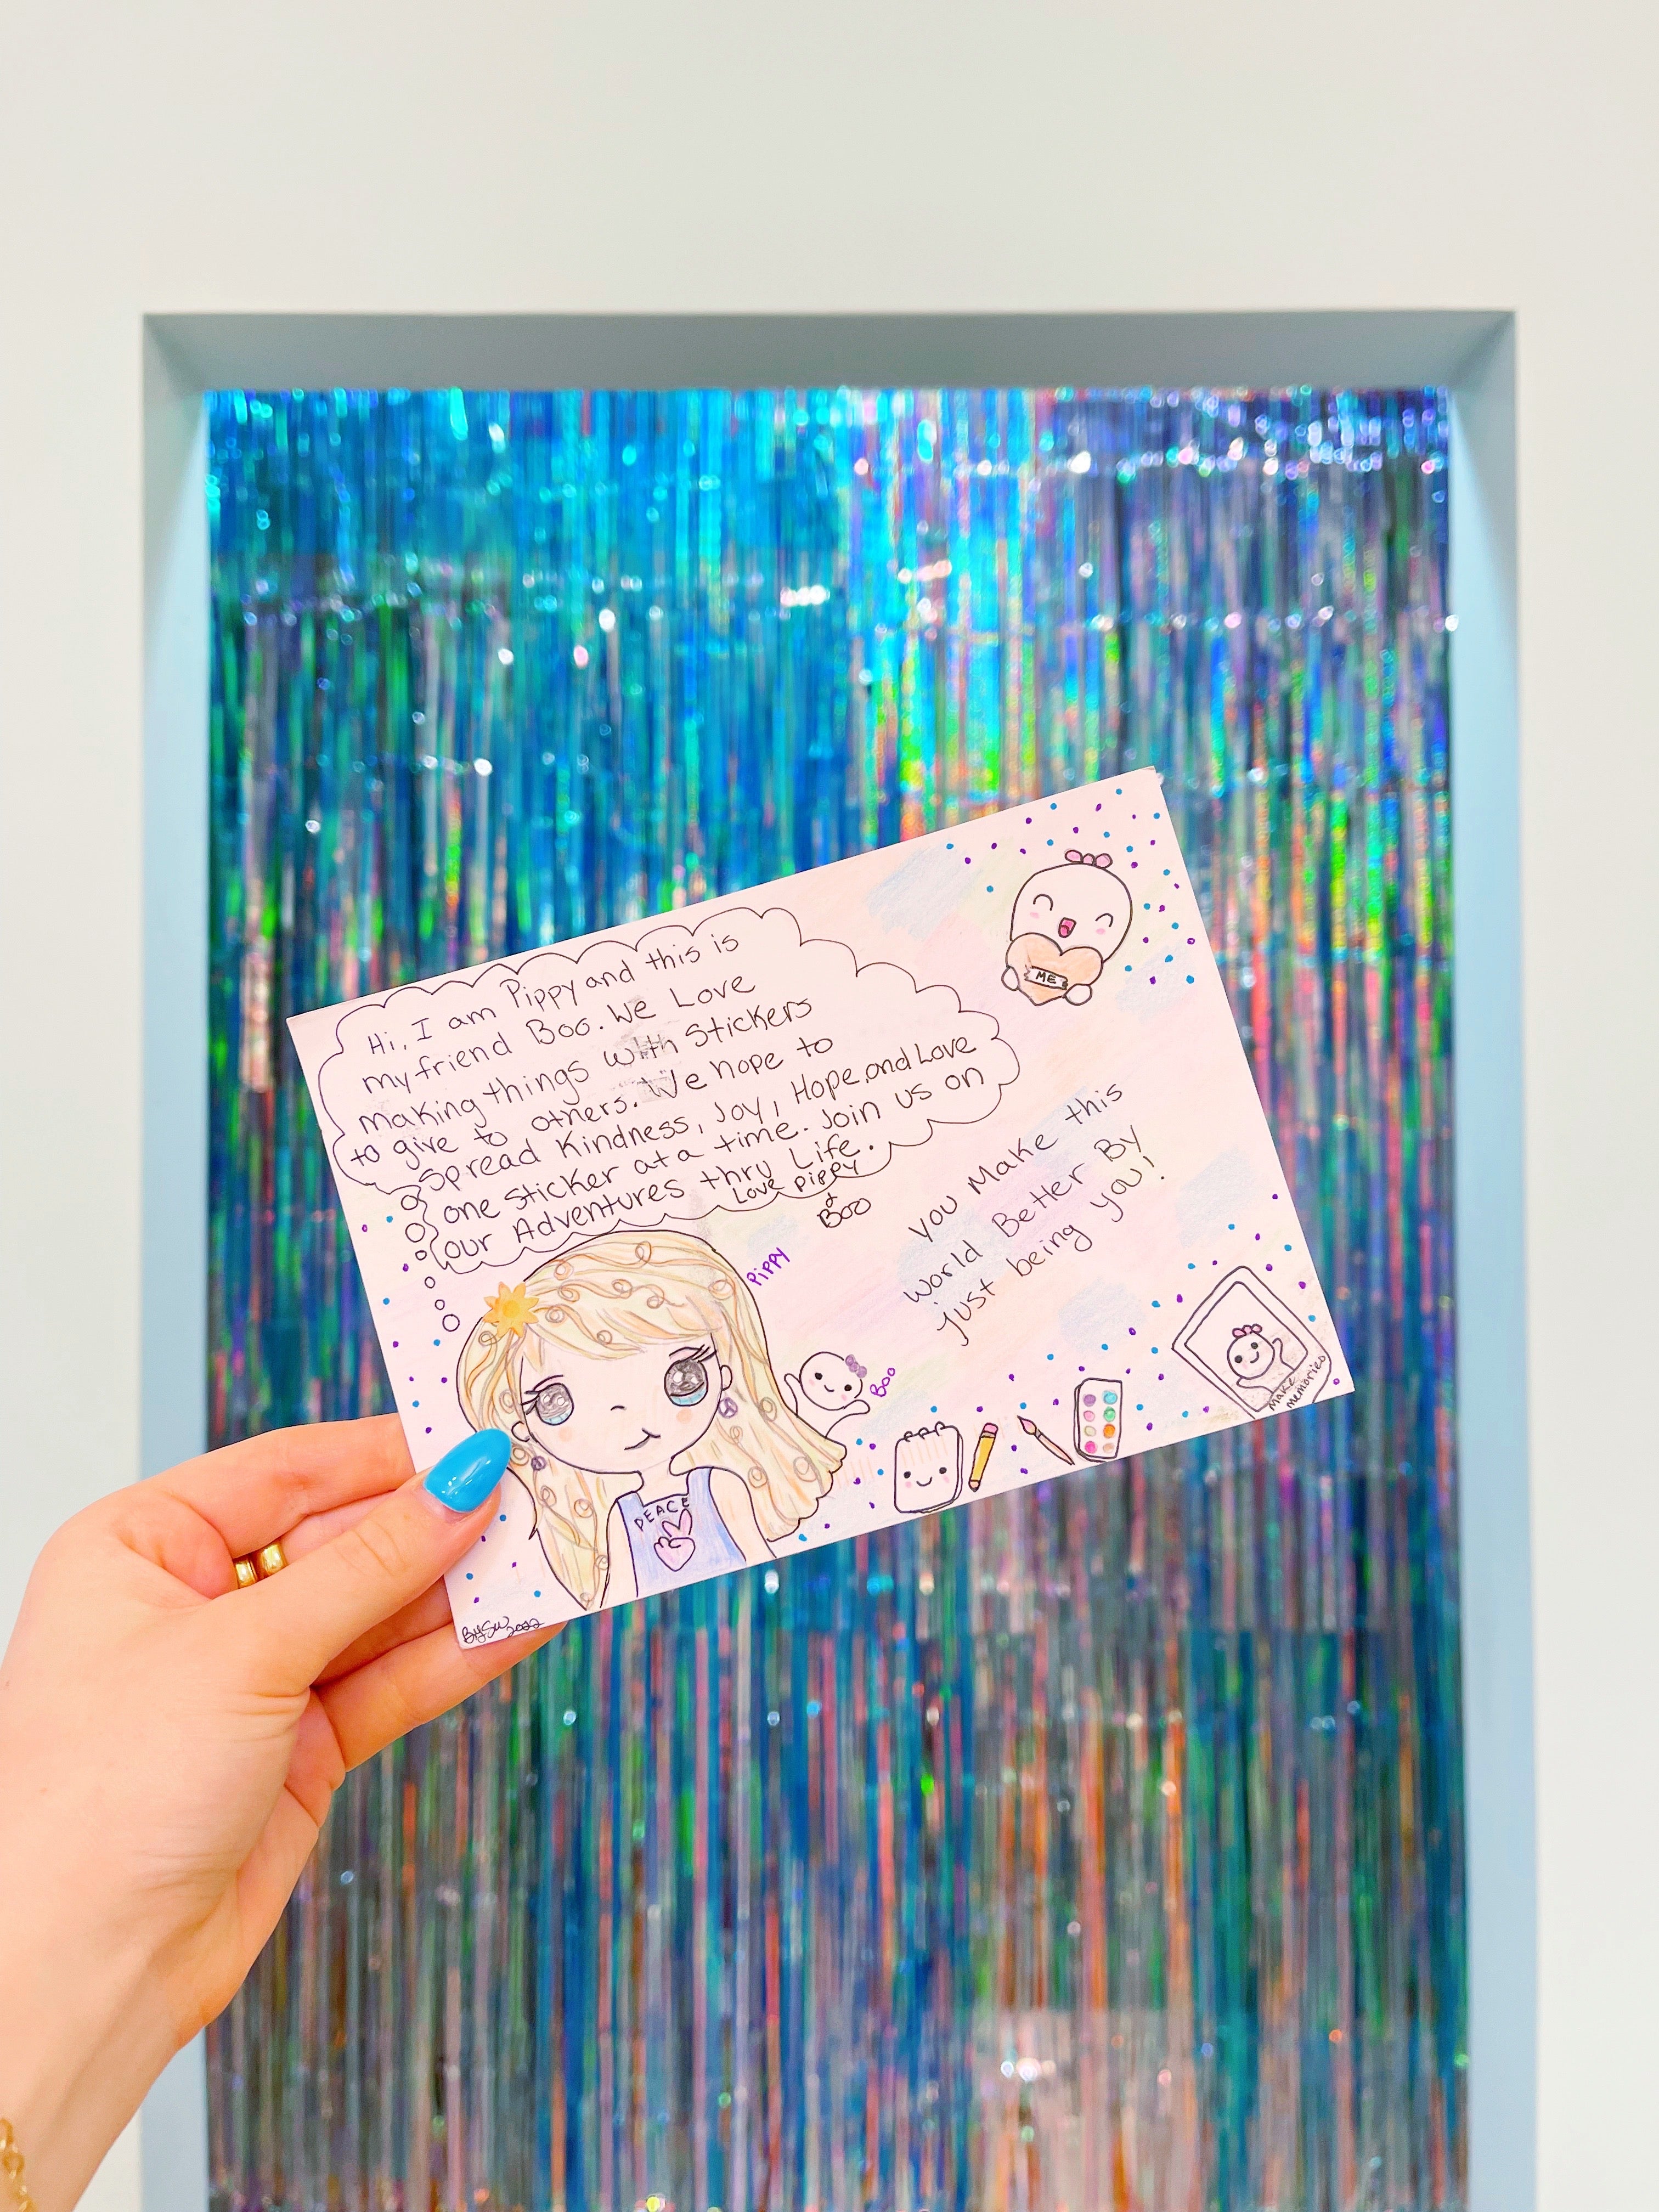 Fanmail Friday: “You make this world better by just being you!”